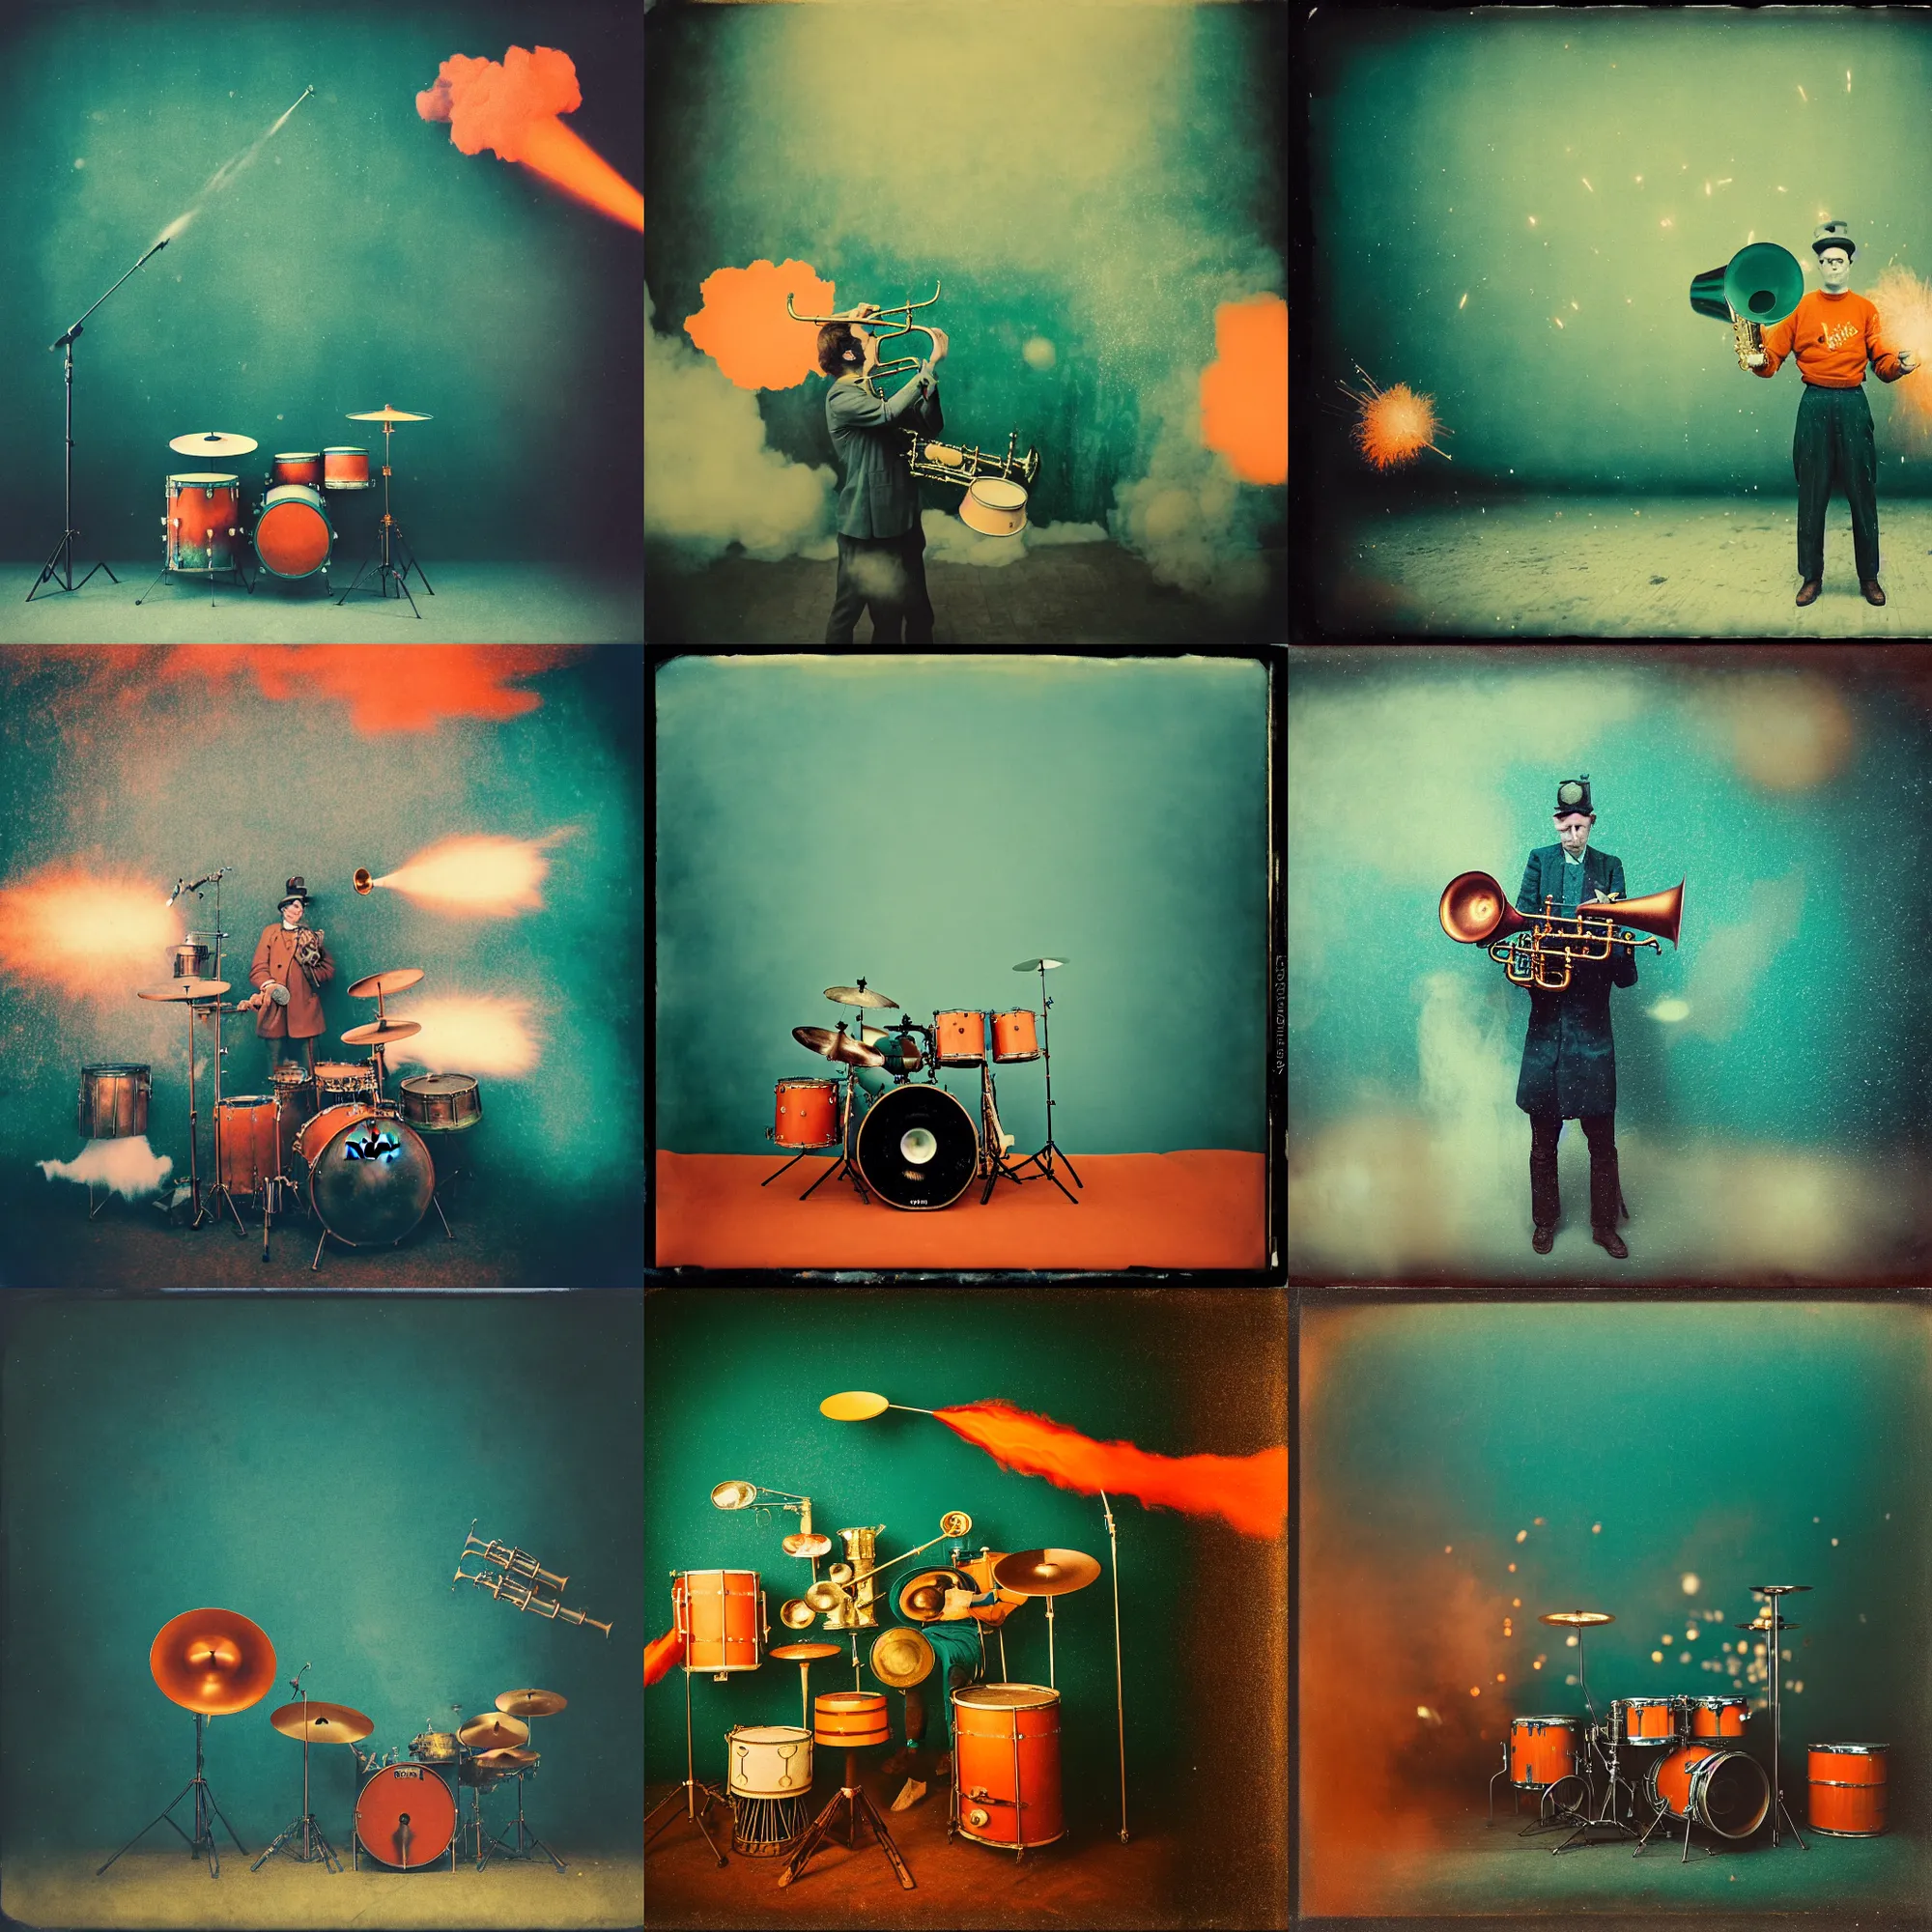 Prompt: kodak portra 4 0 0, wetplate, muted colours, teal orange, drum set, trumpet, 1 9 1 0 s style, motion blur, portrait photo of a backdrop, explosions, rockets, bombs, sparkling, stargazer, snow, fog, steampunk, by georges melies and by britt marling